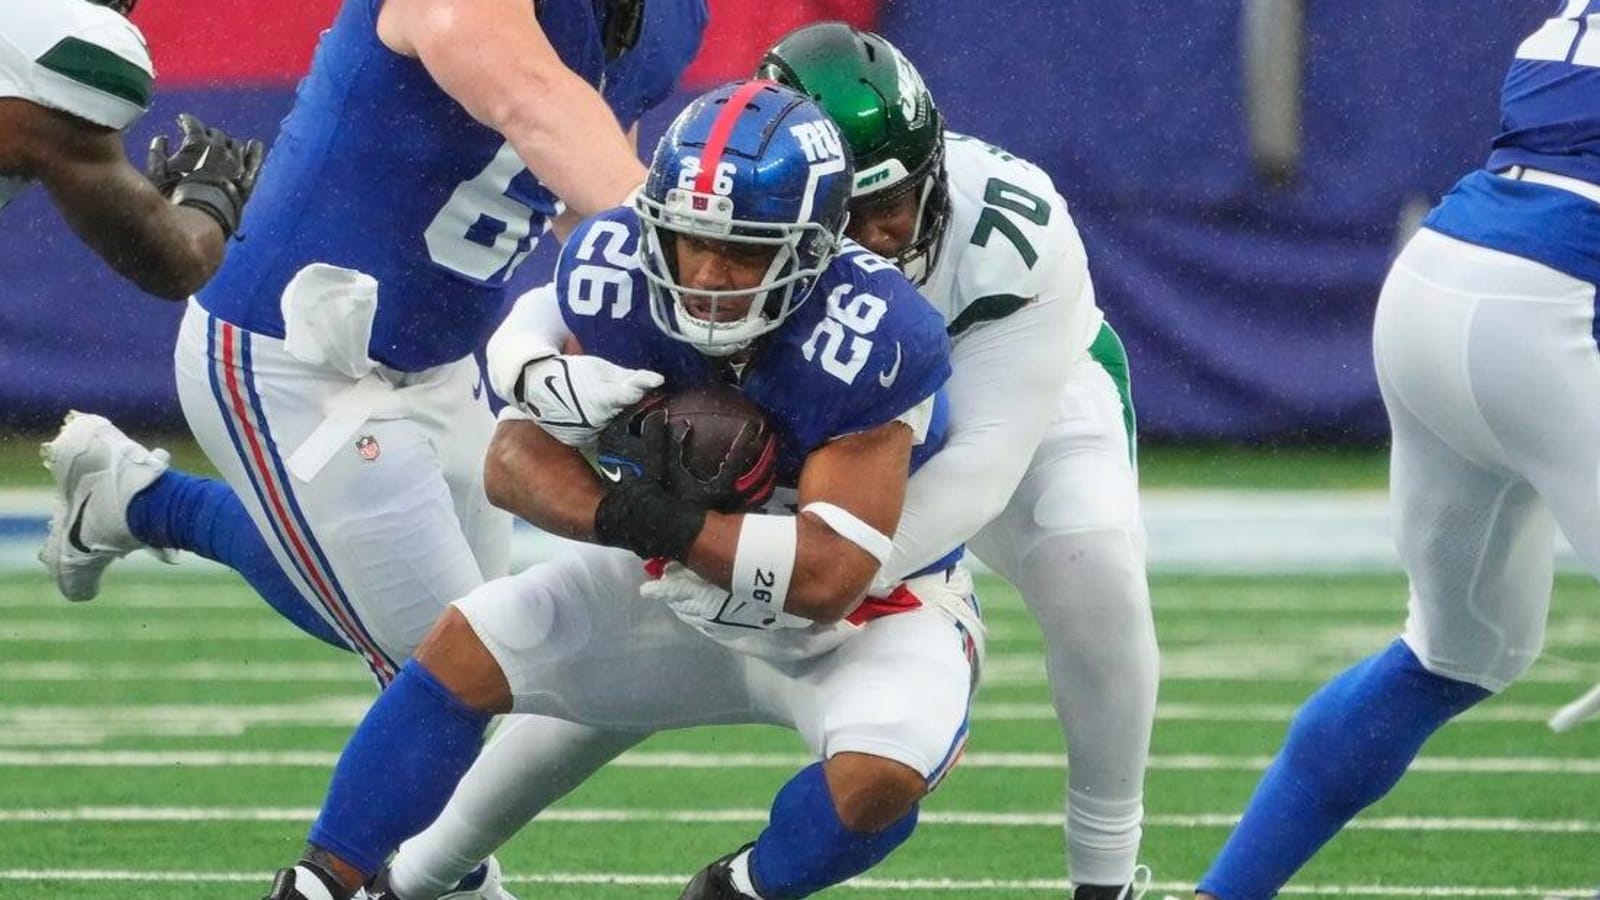 Punt, morass and kick: Jets edge Giants 13-10 in OT